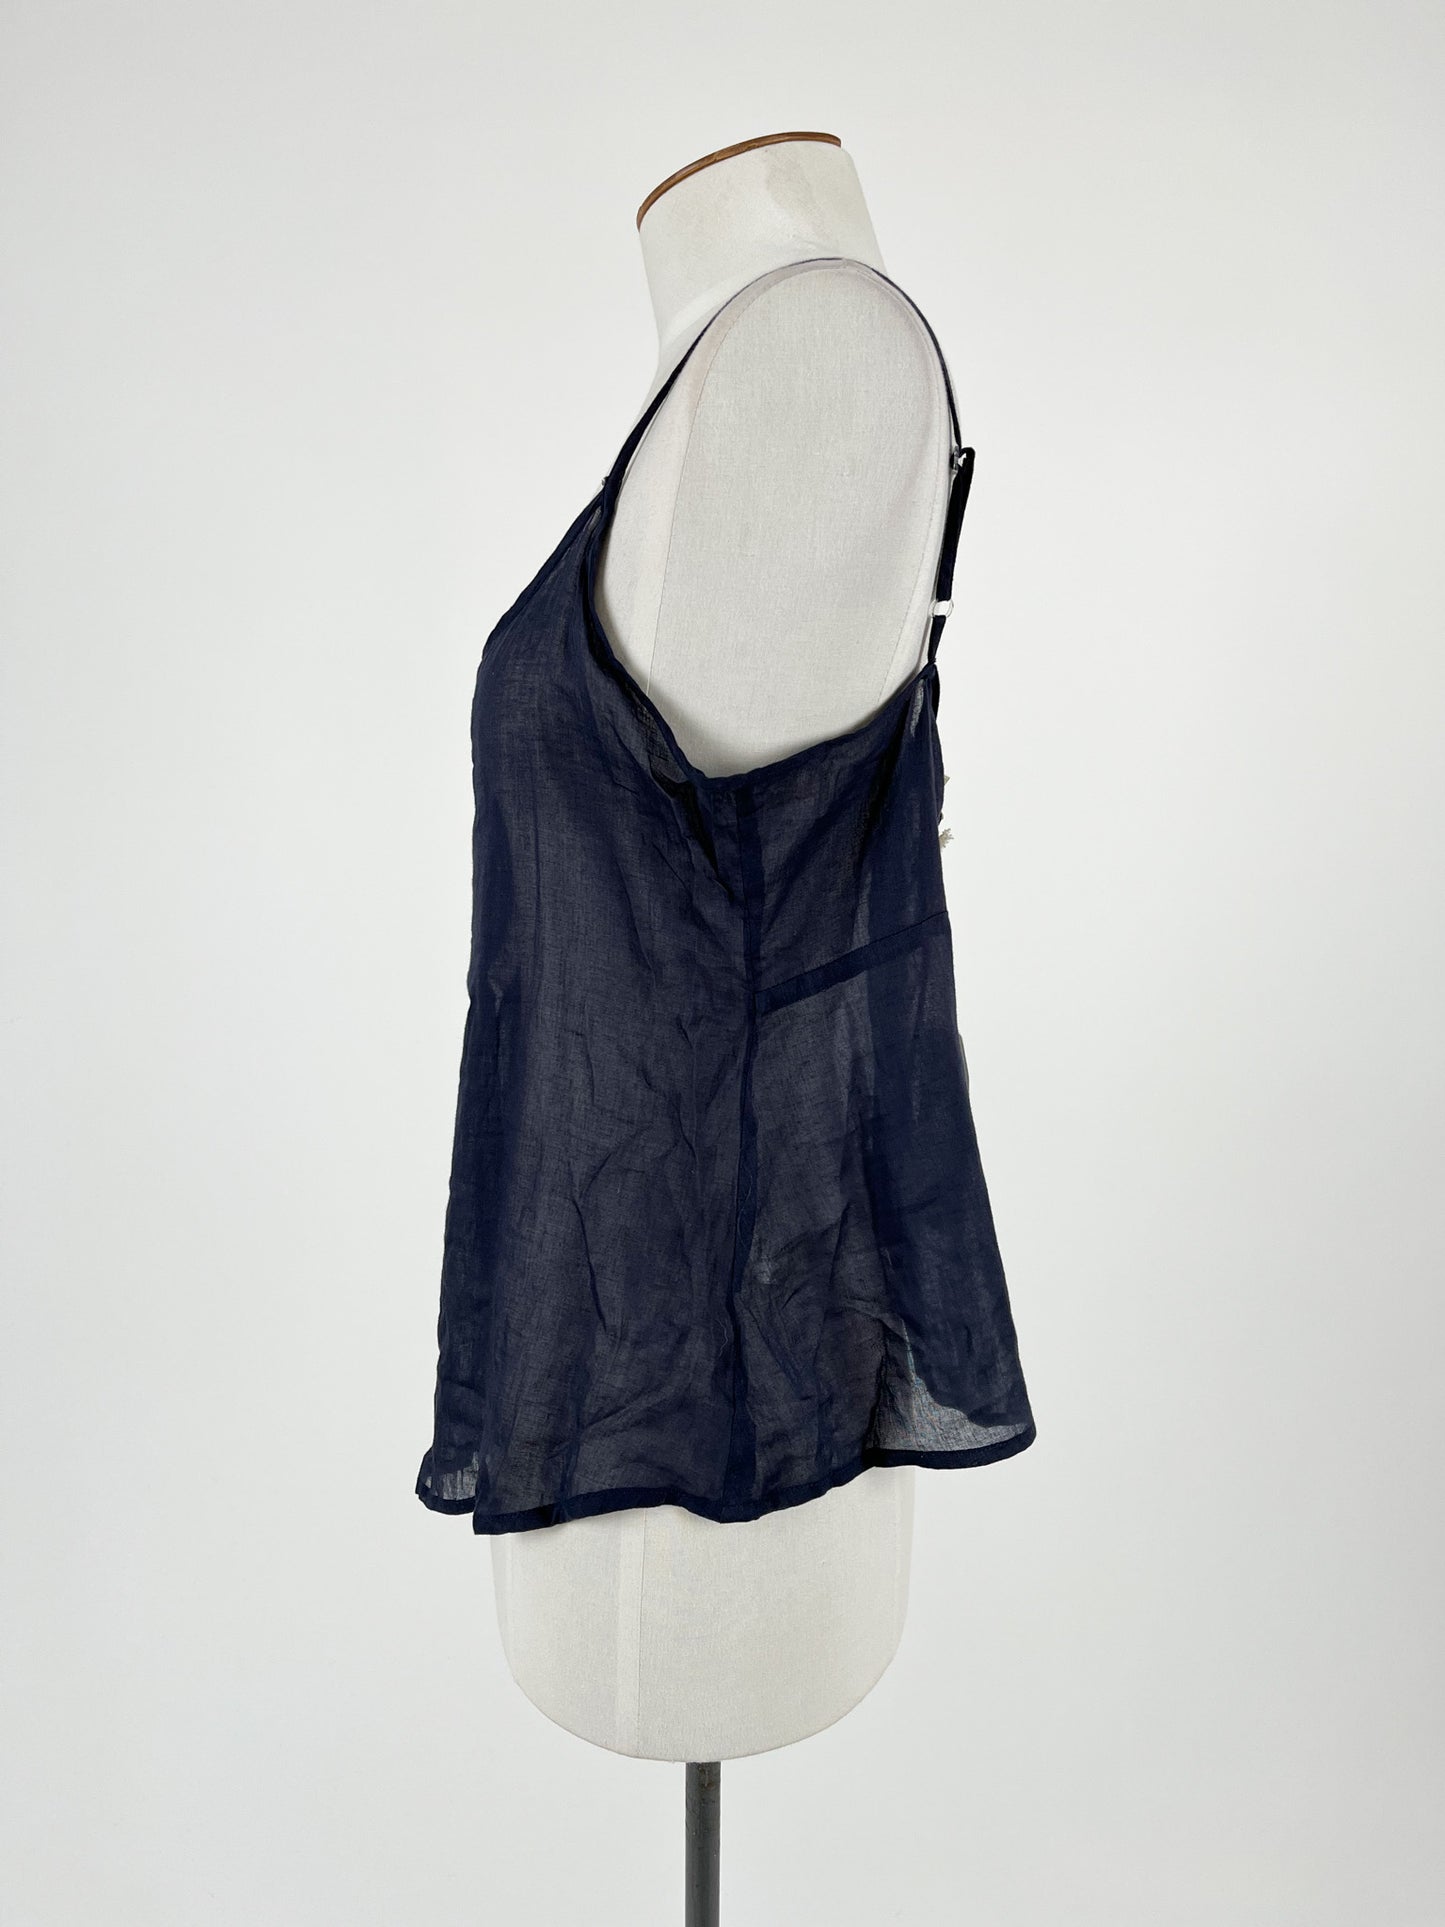 Humidity | Navy Casual/Lingerie Top | Size S